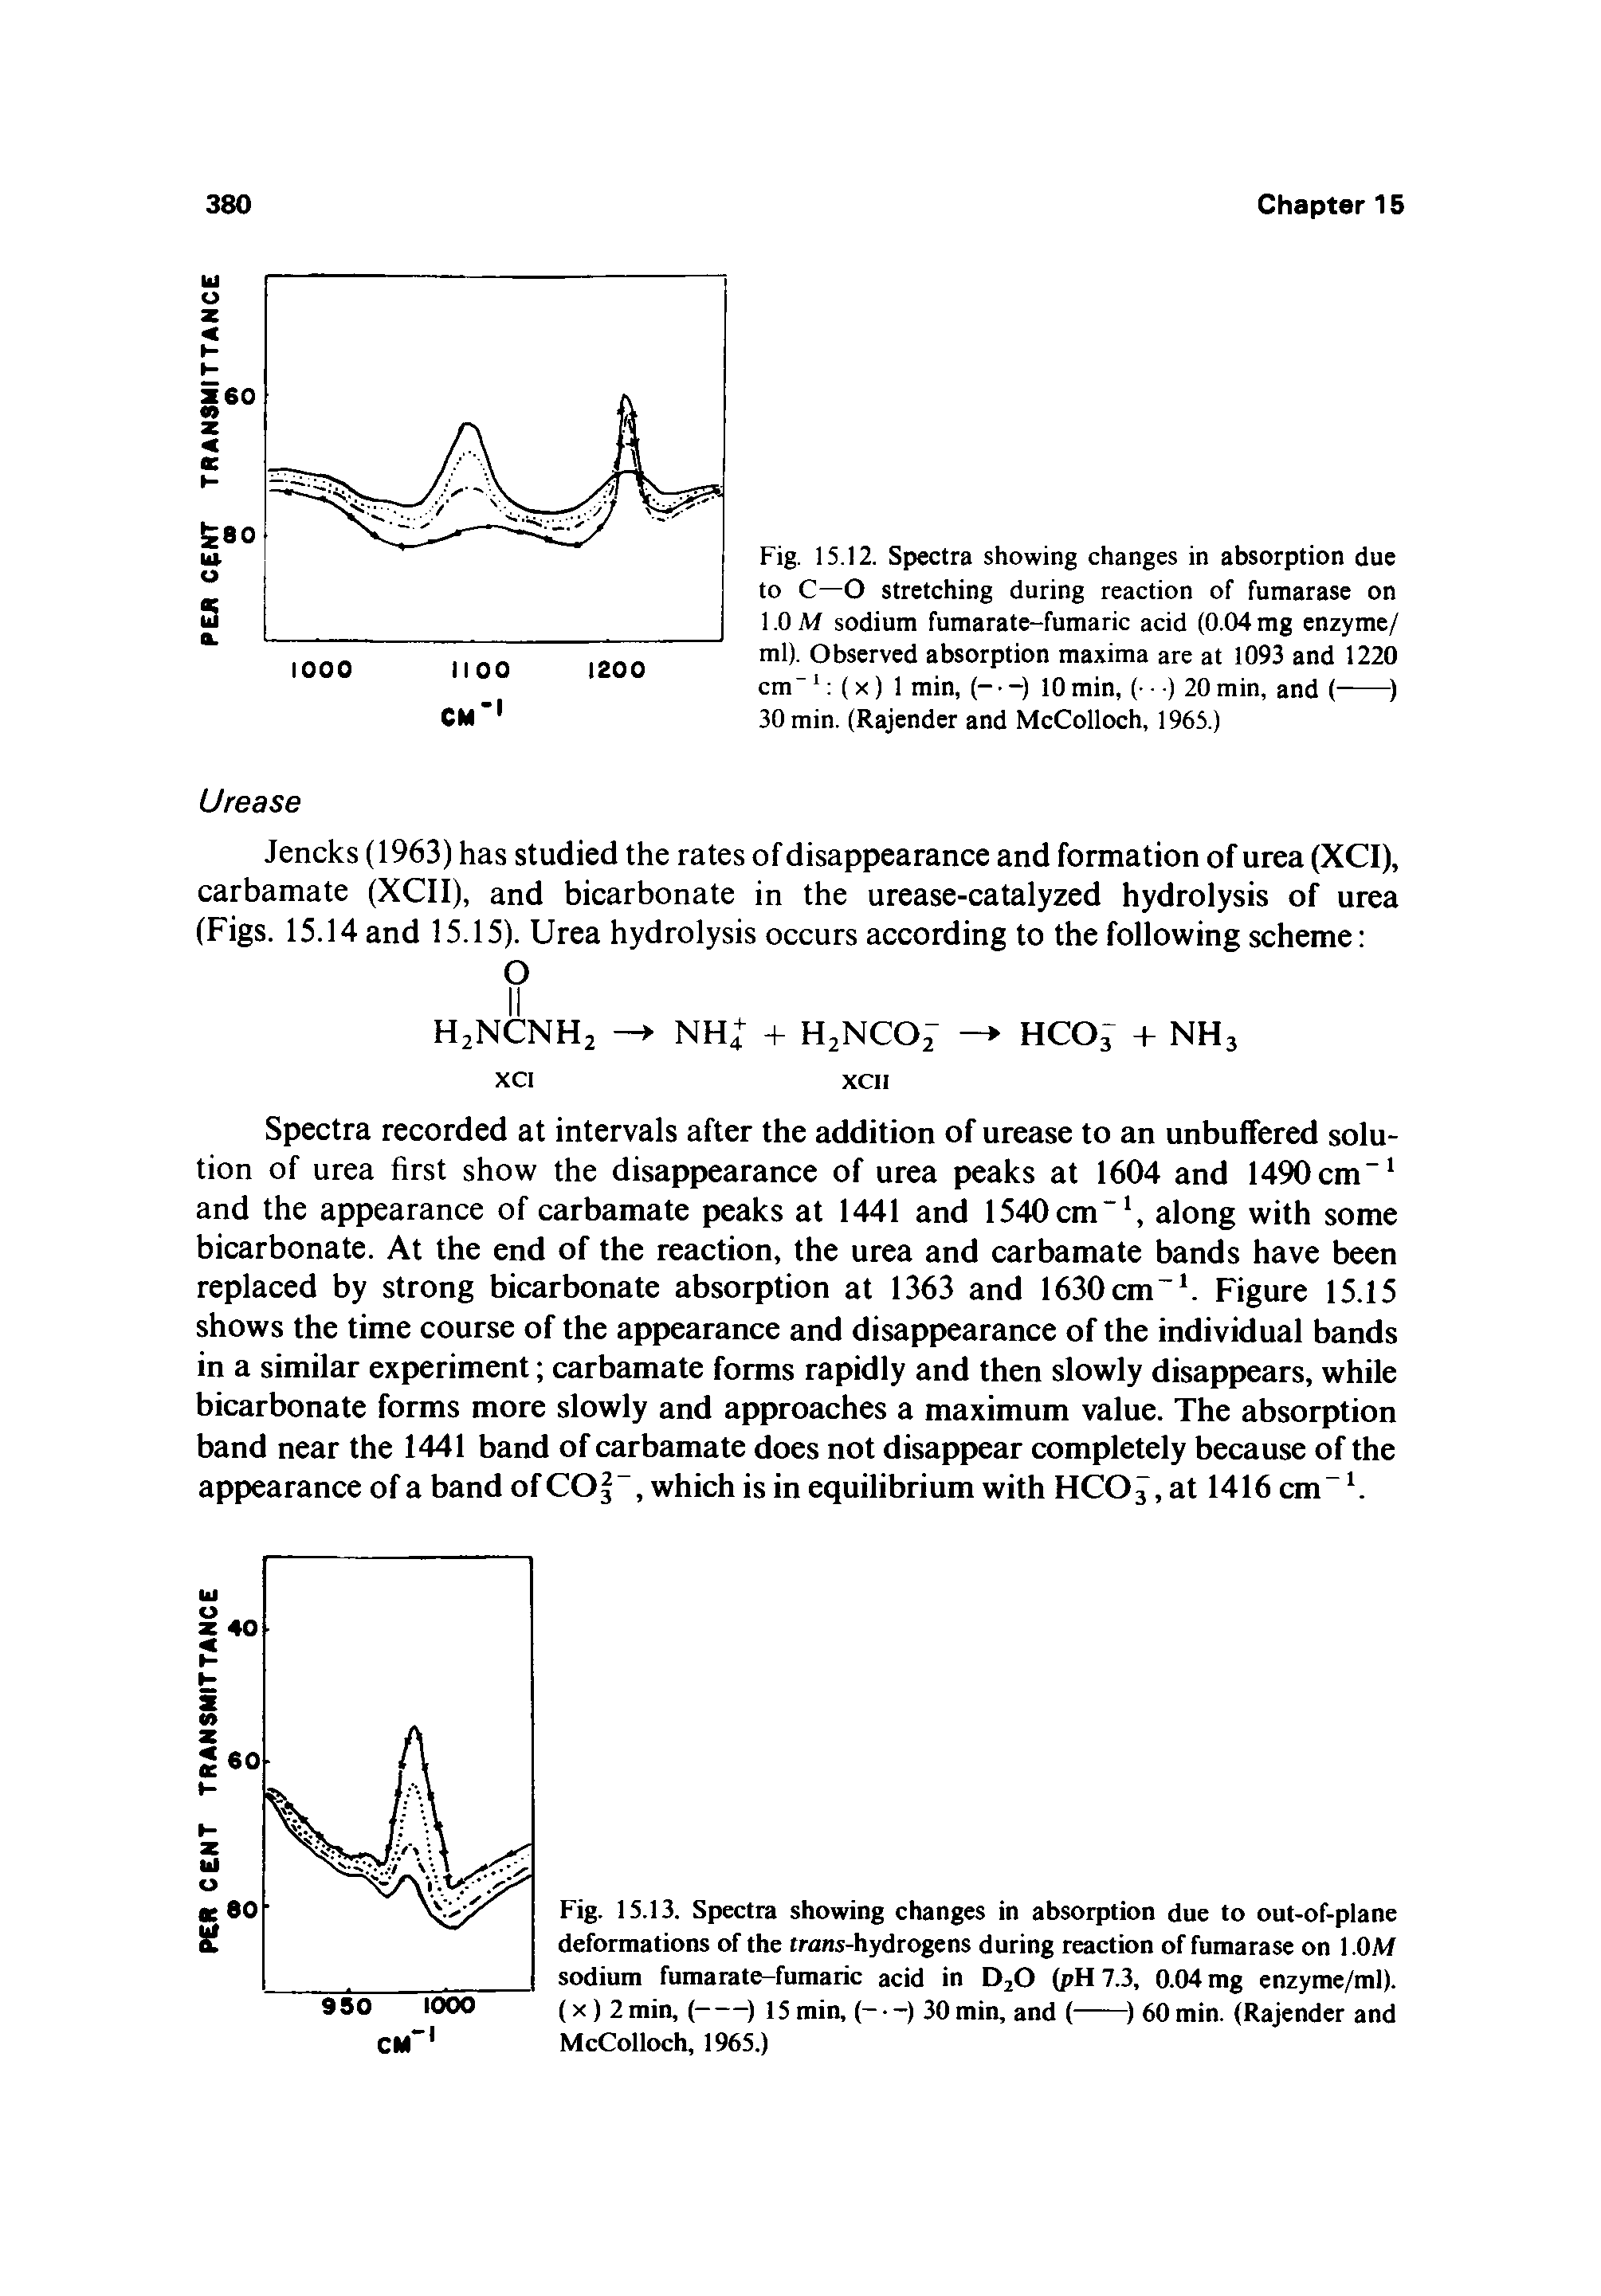 Fig. 15.13. Spectra showing changes in absoqition due to out-of-plane deformations of the trans-hydrogens during reaction of fumarase on l.OM sodium fumarate-fumaric acid in DjO (pH 7.3, 0.04 mg enzyme/ml).